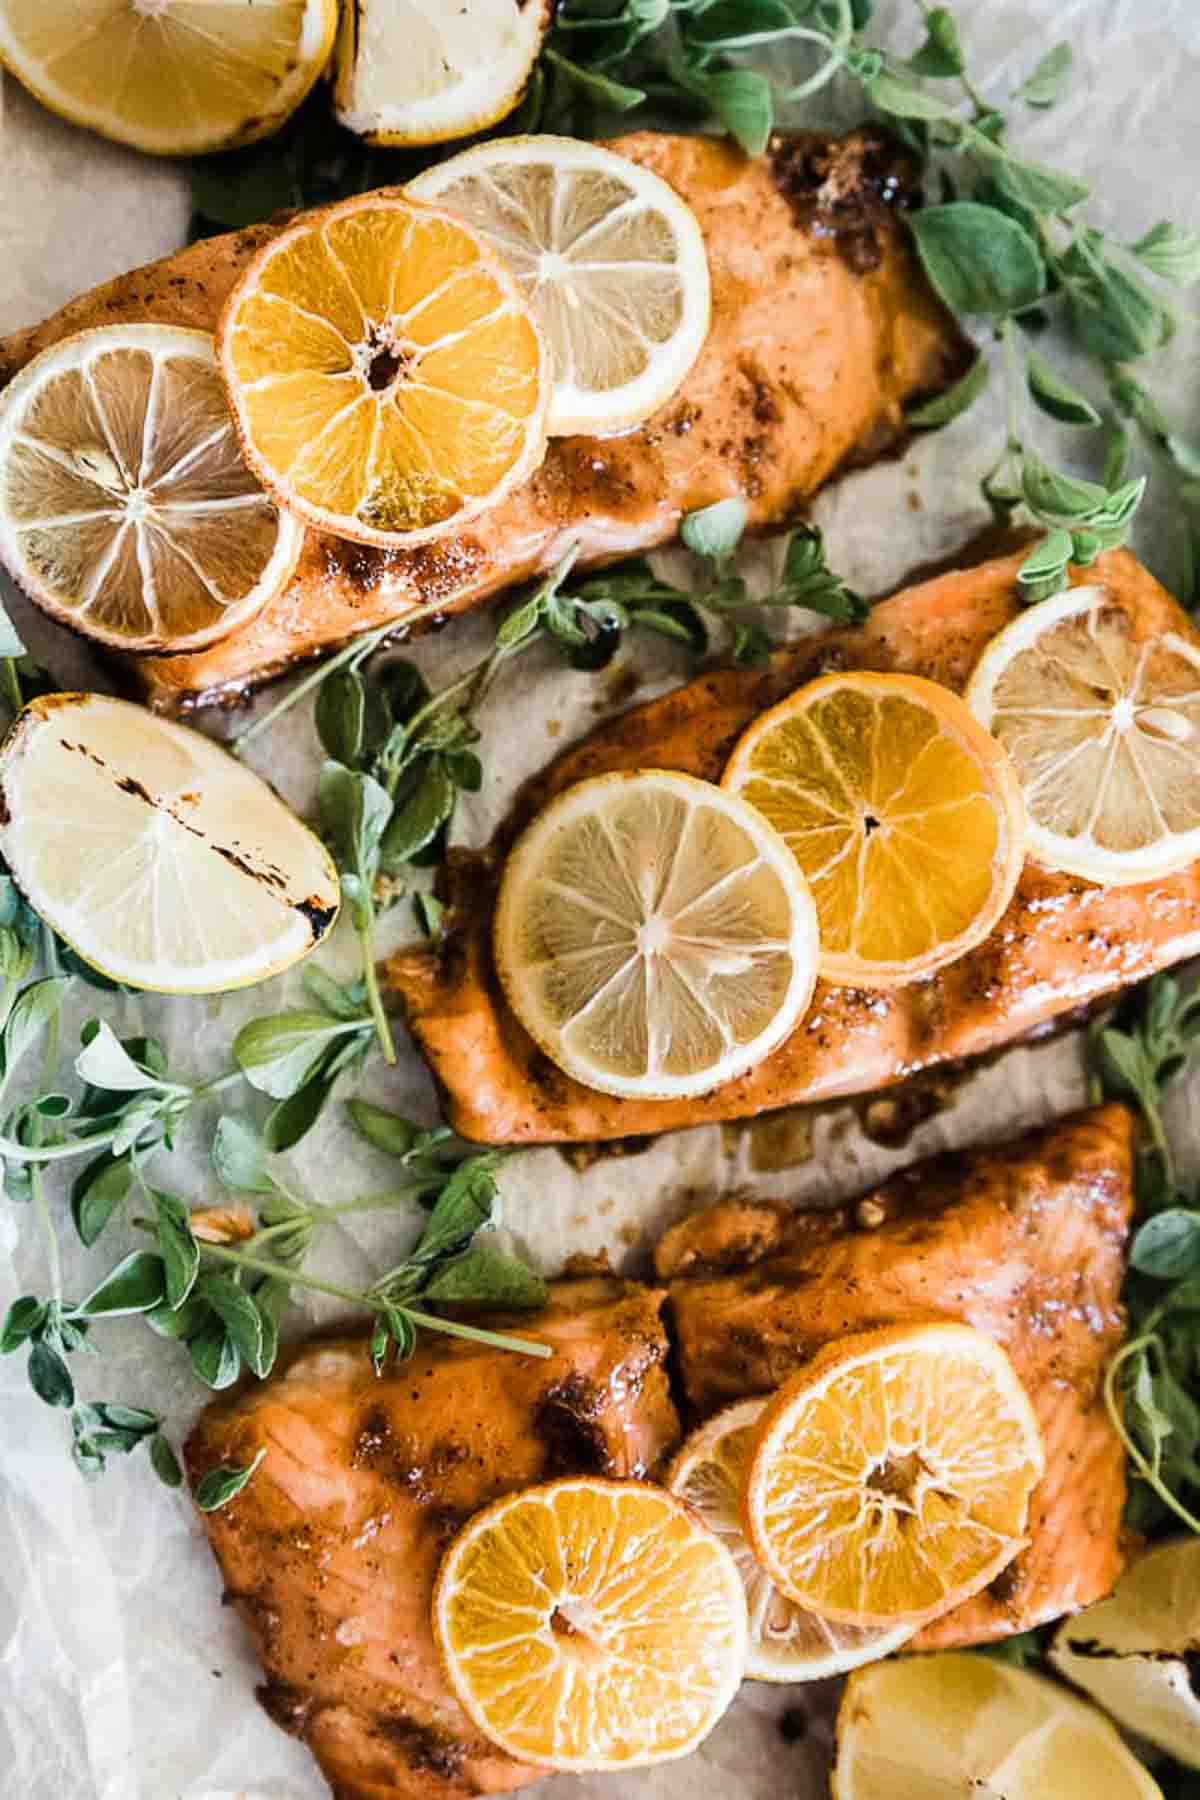 A closeup of orange glazed salmon on a baking tray, The salmon has citrus slices on top of it.